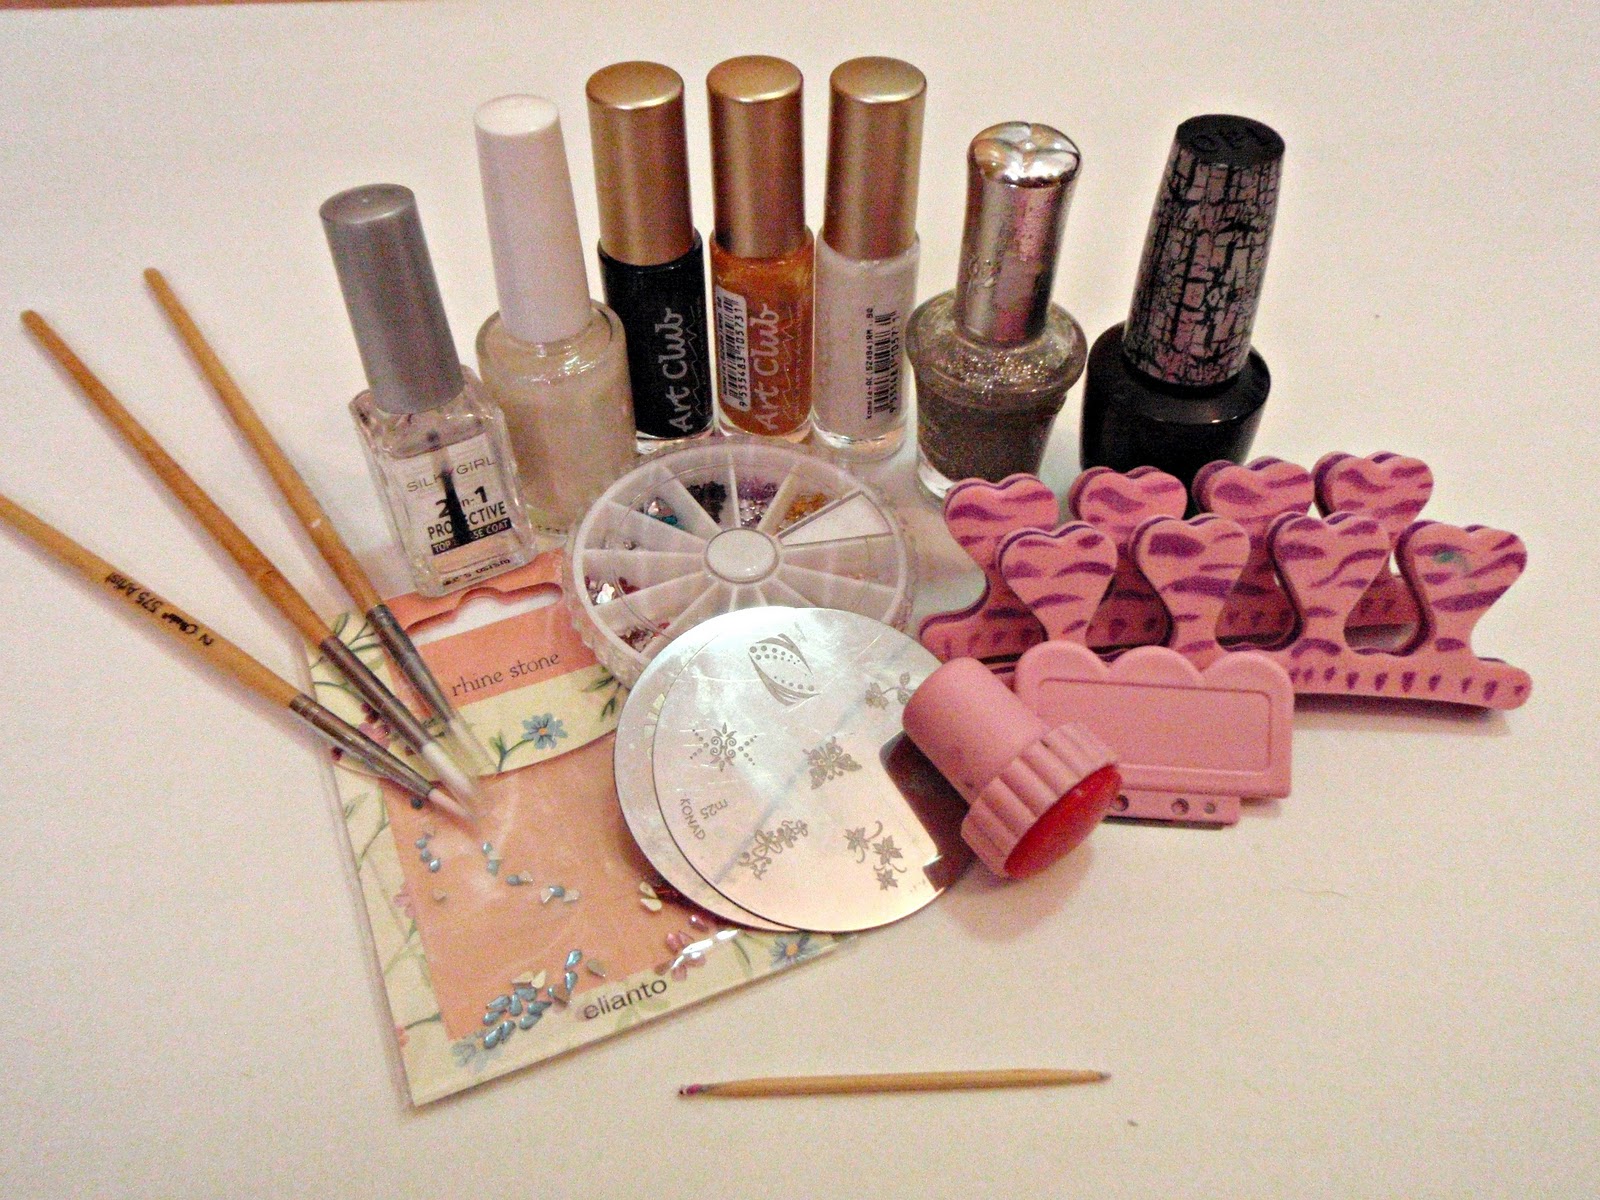 5. The Ingredients in Nail Art Products: Are They Safe? - wide 6